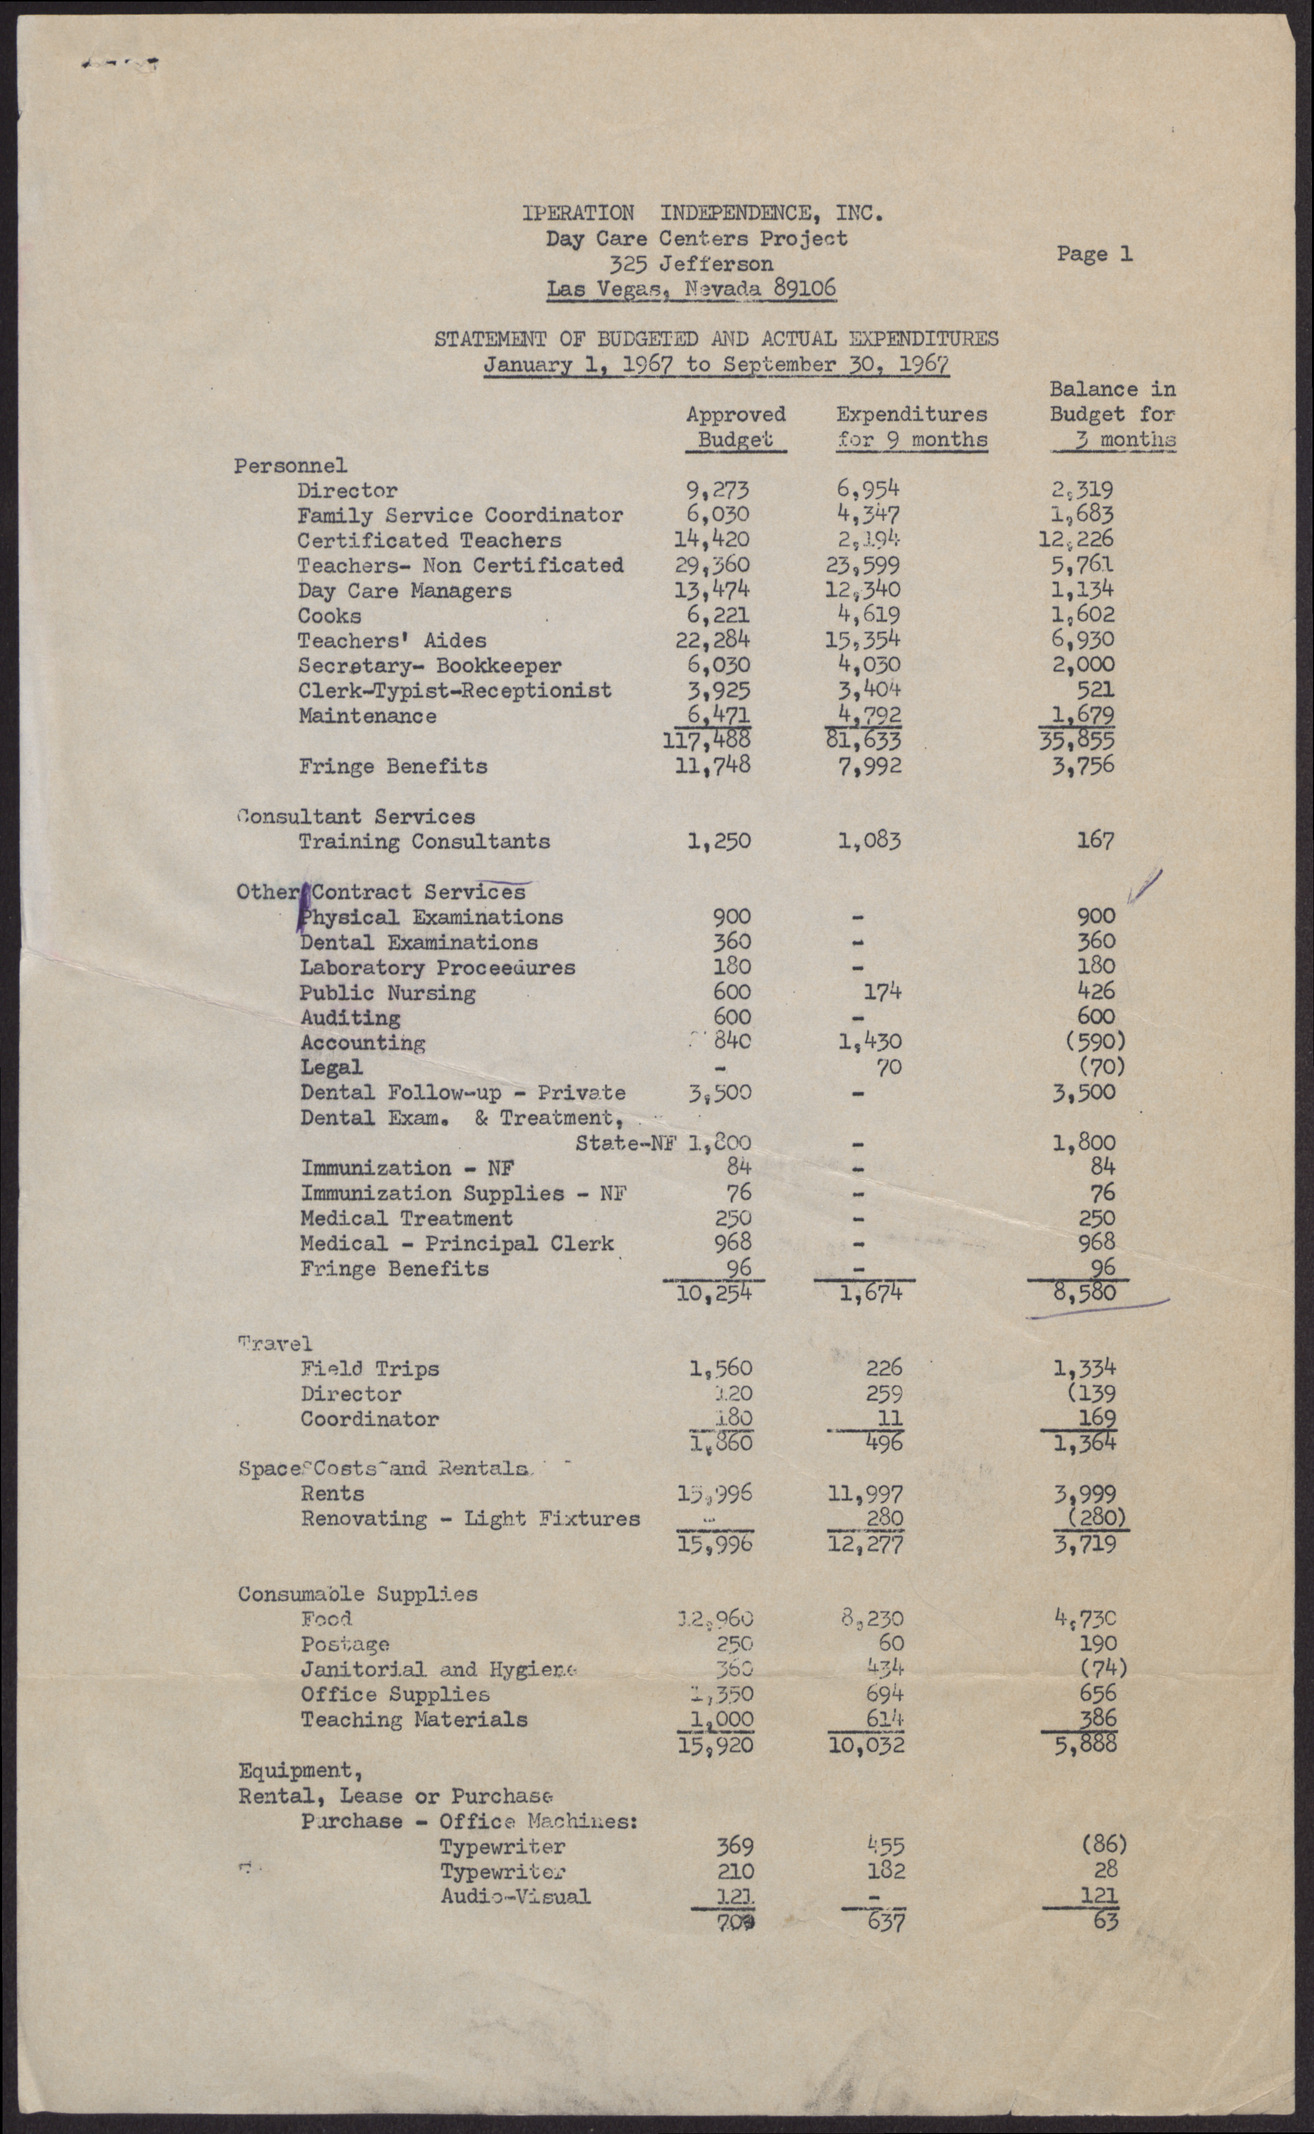 Operation Independence Incorporated Day Care Centers Project Statement of Budgeted and Actual Expenditures (2 pages), January 1 to September 30, 1967